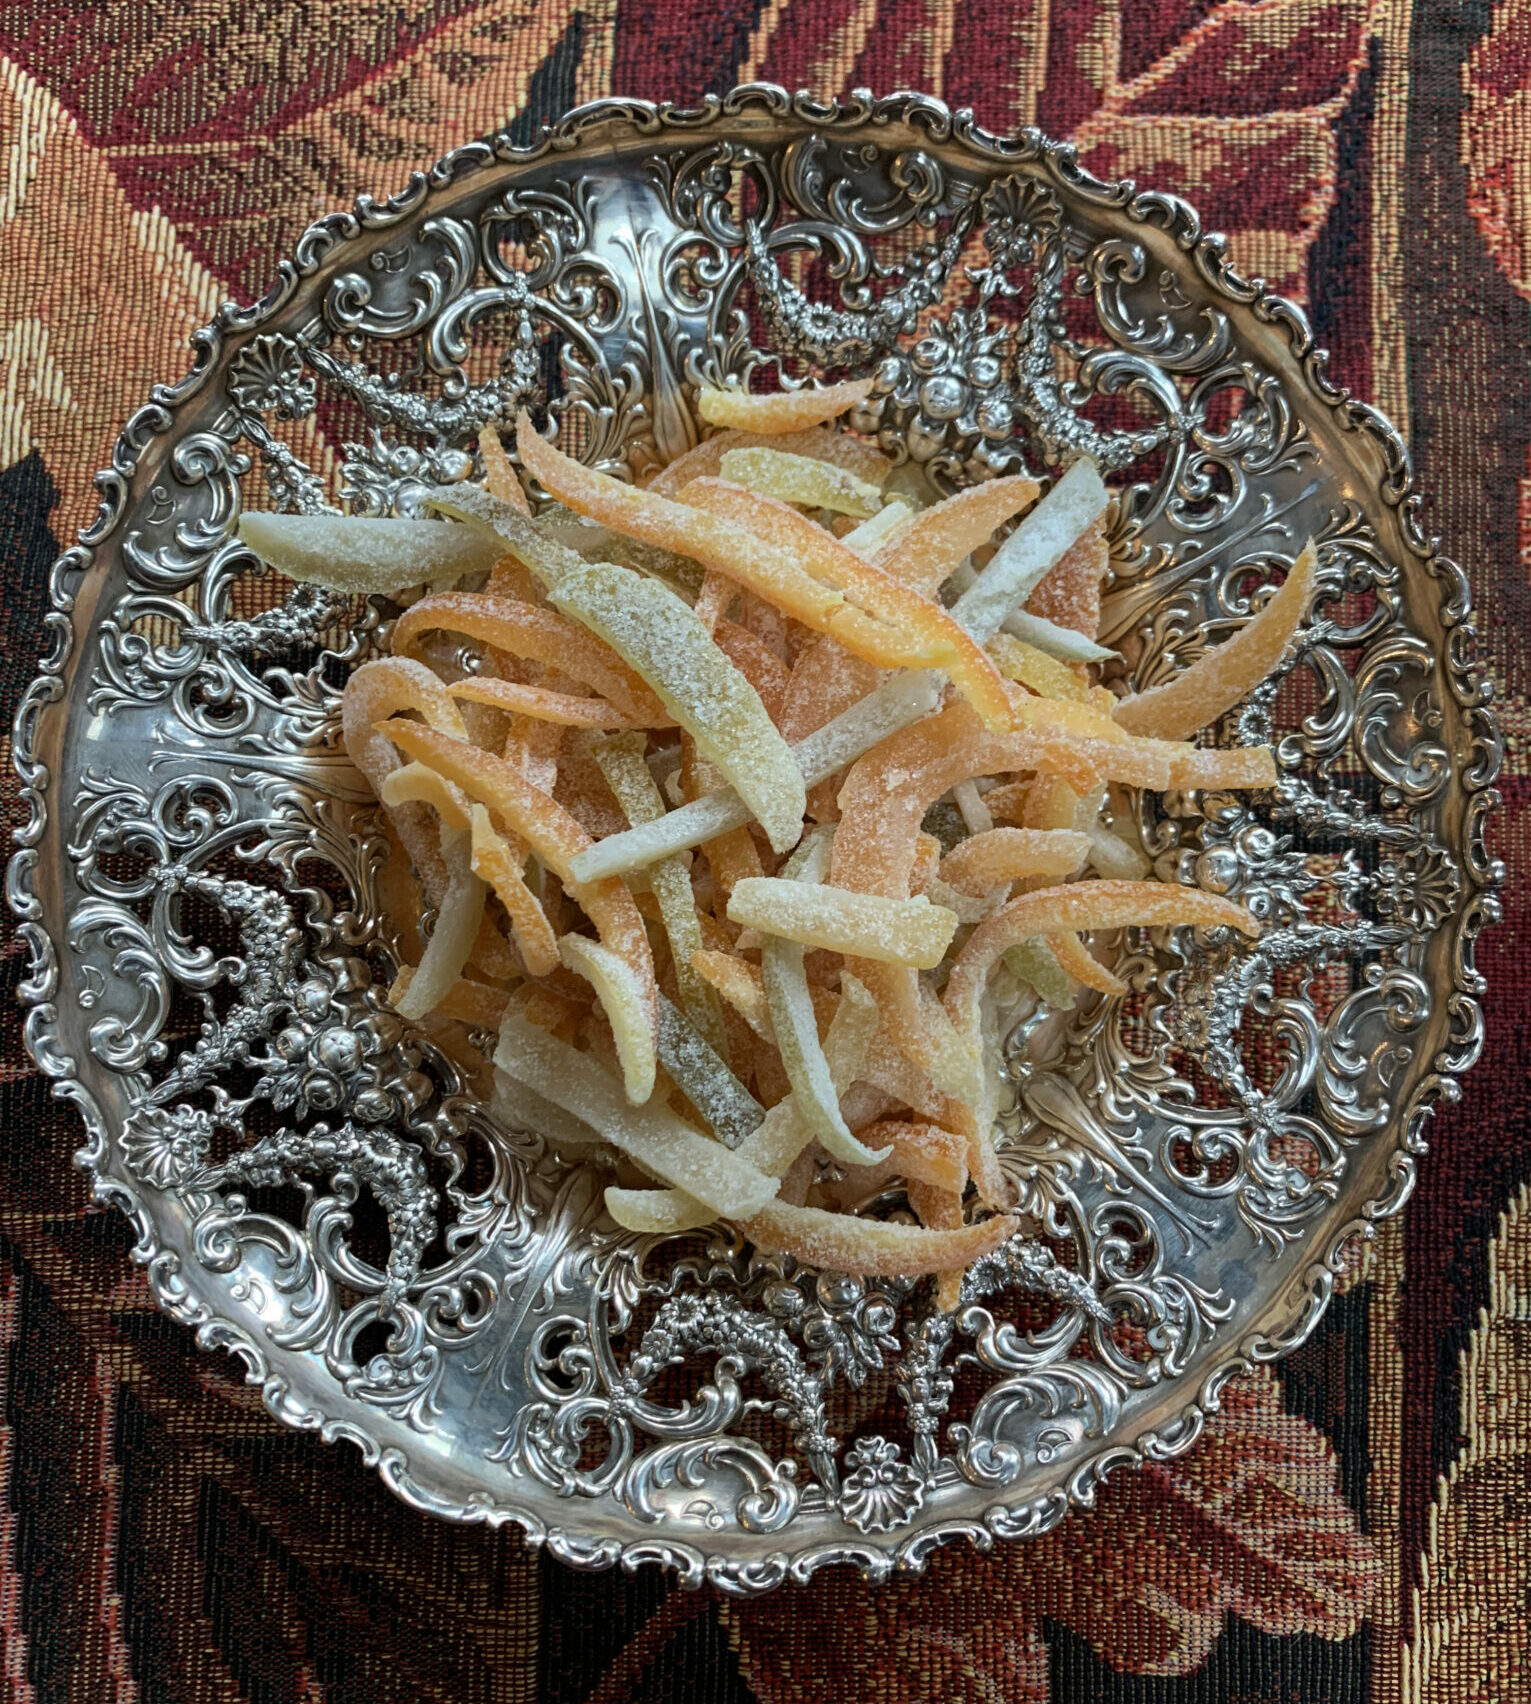 CANDIED CITRUS PEEL (MIXED PEEL) AND THE SLOW FOOD MOVEMENT - A Woman Cooks  in Asheville